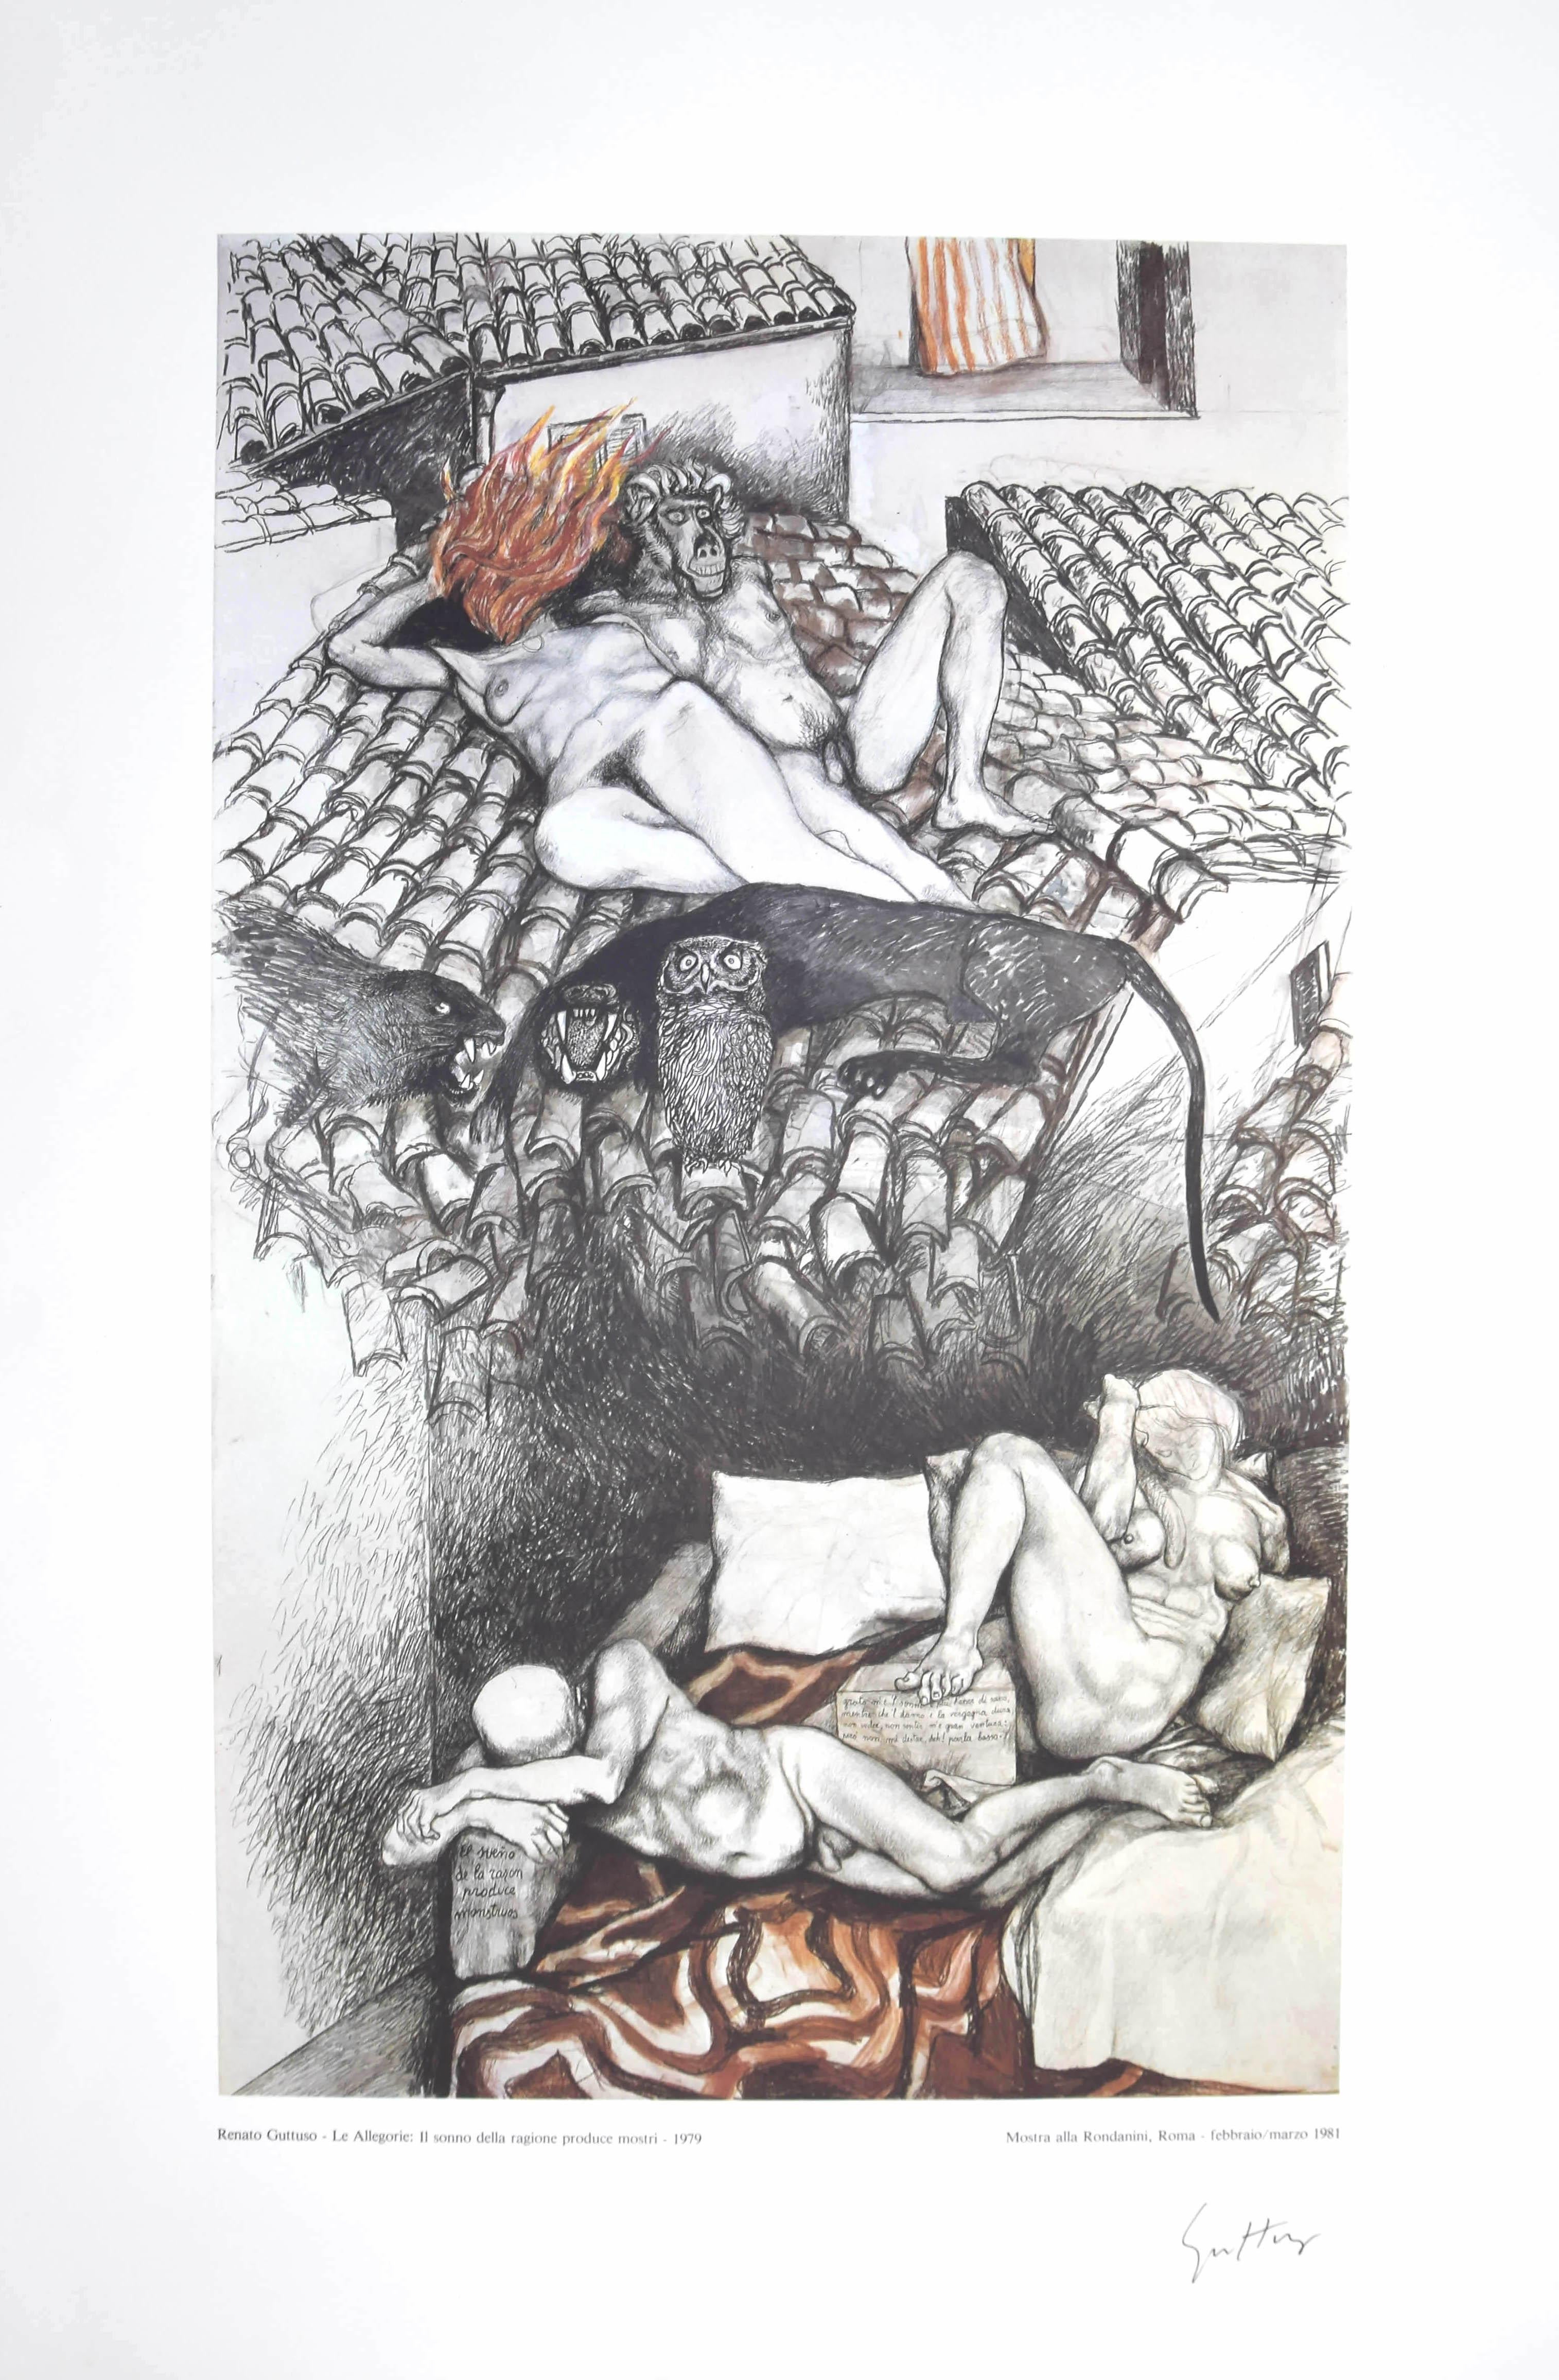 Renato Guttuso Figurative Print - The Sleep of Reason Creates Monsters - Vintage Offset Poster Hand Signed - 1981